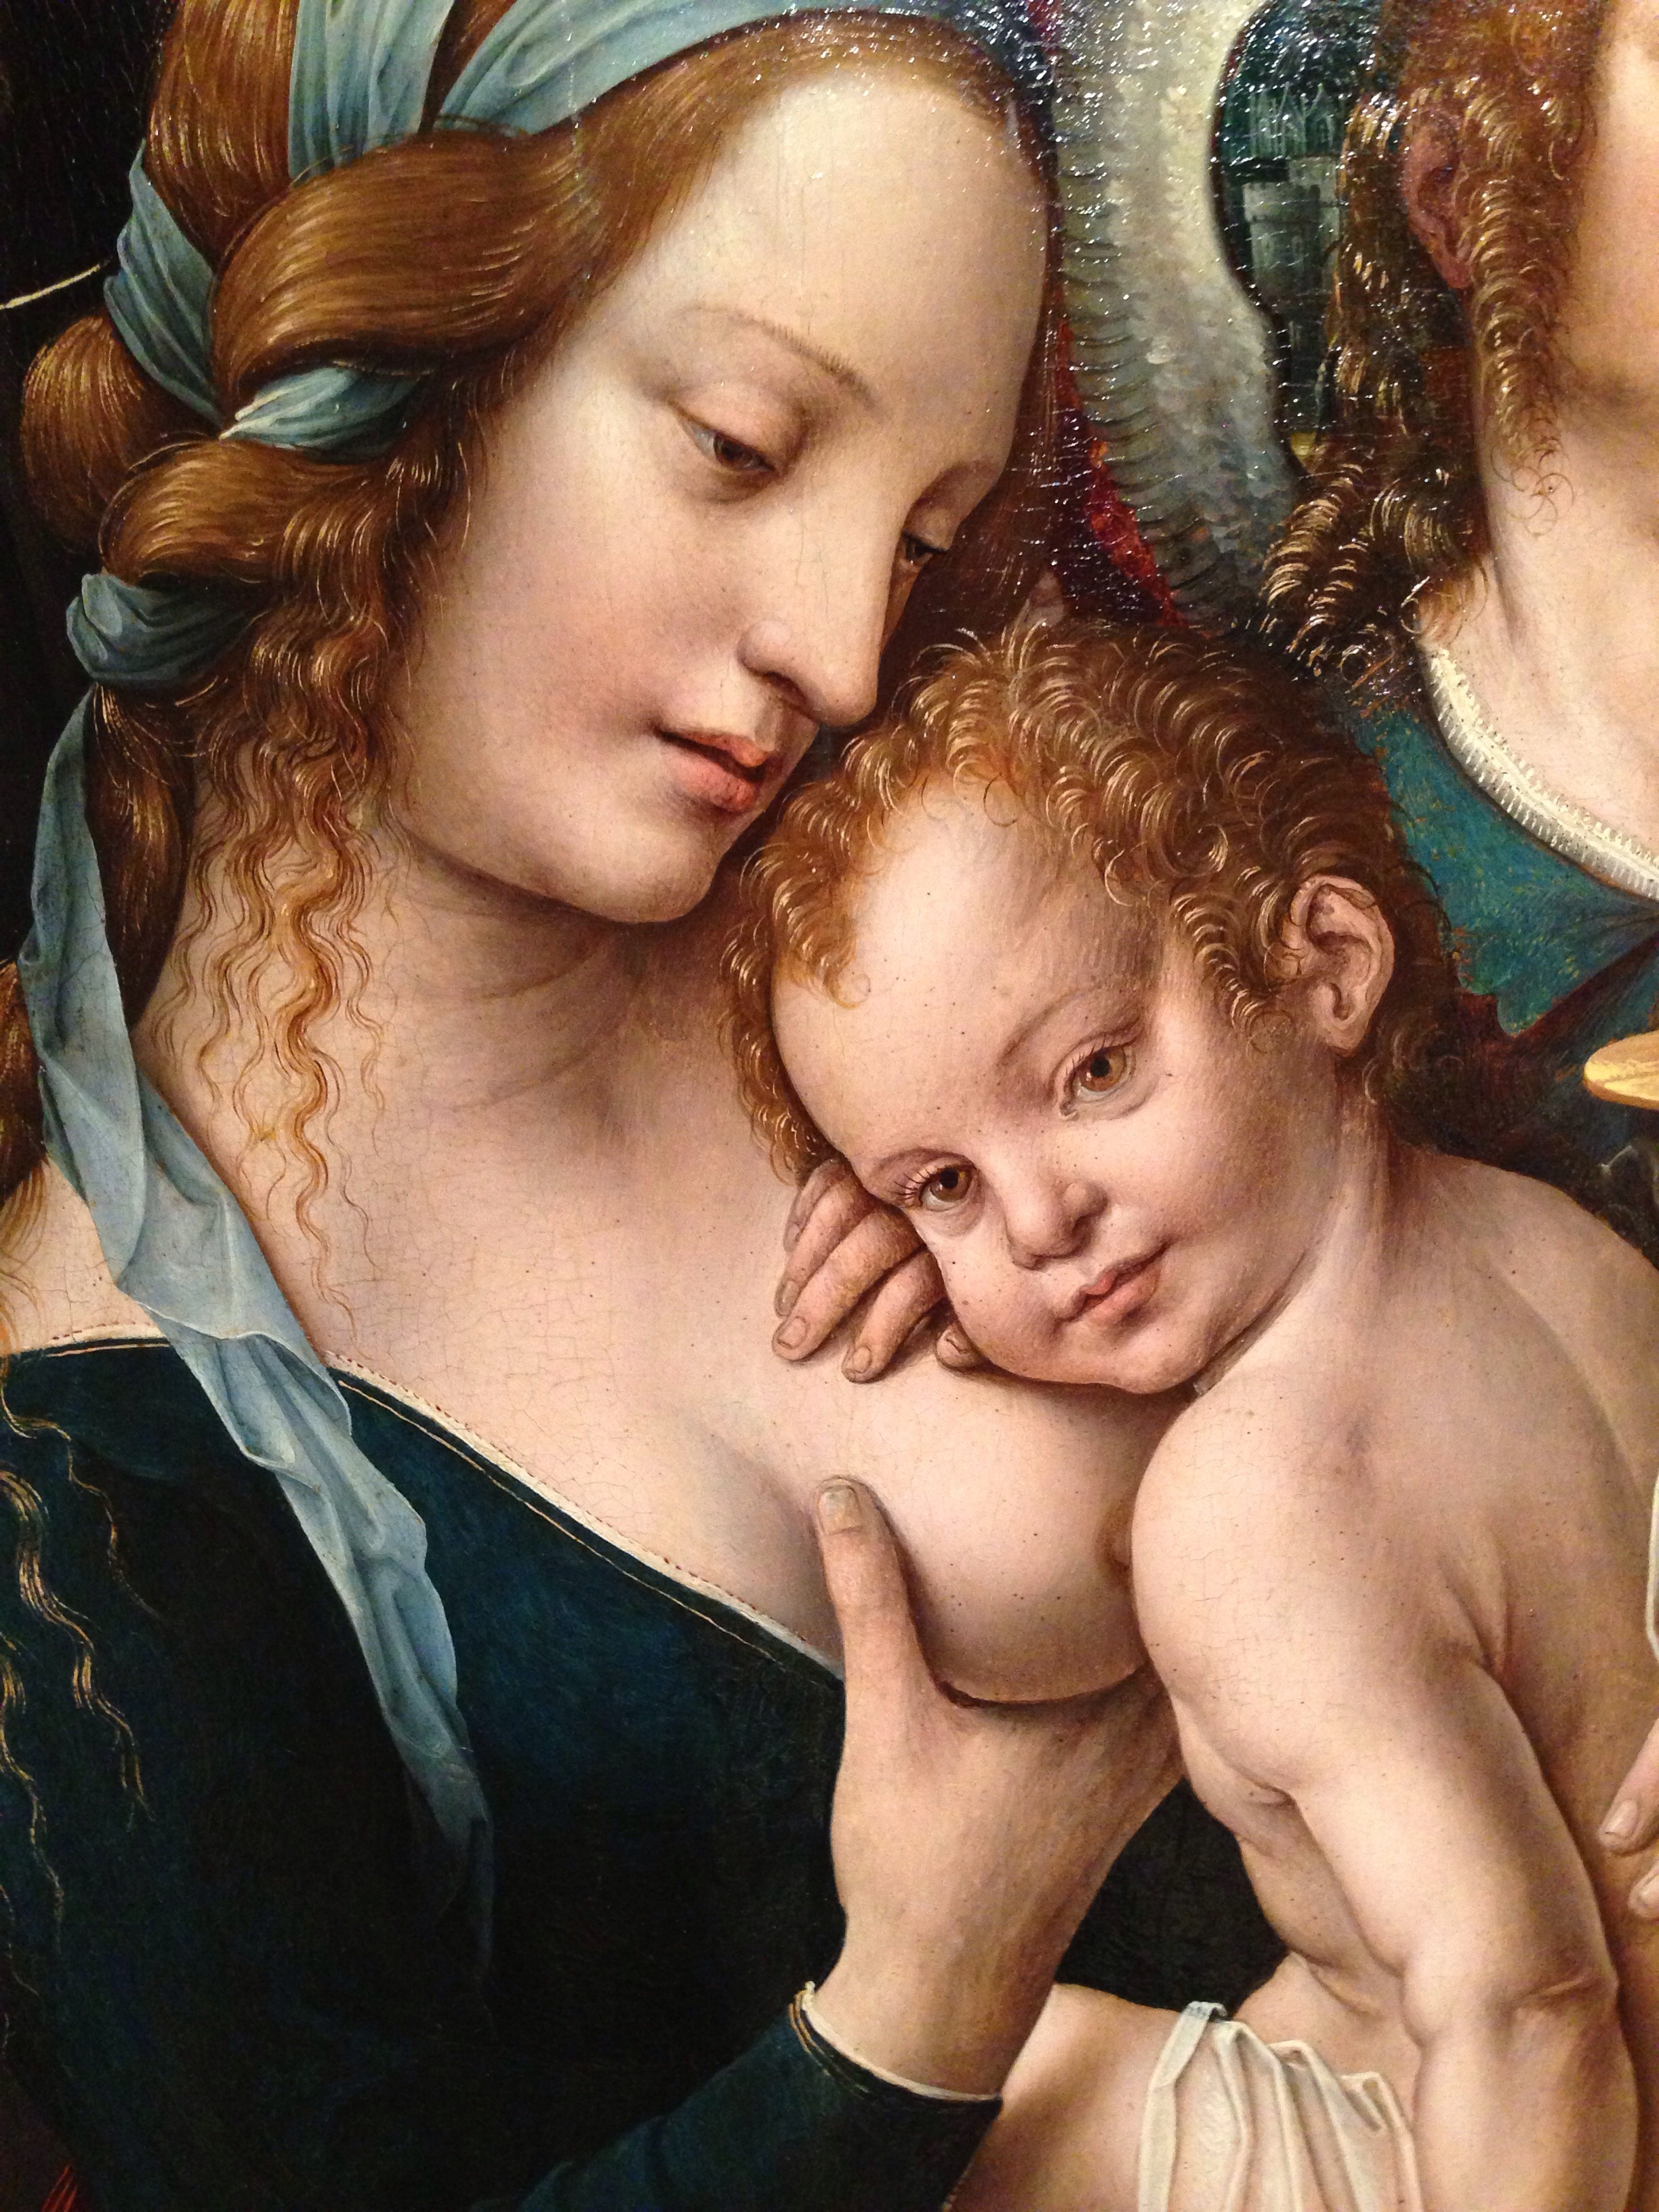 I absolutely love the vibrance of the colors, and the tenderness of Mary holding her baby. - 20131213-150757